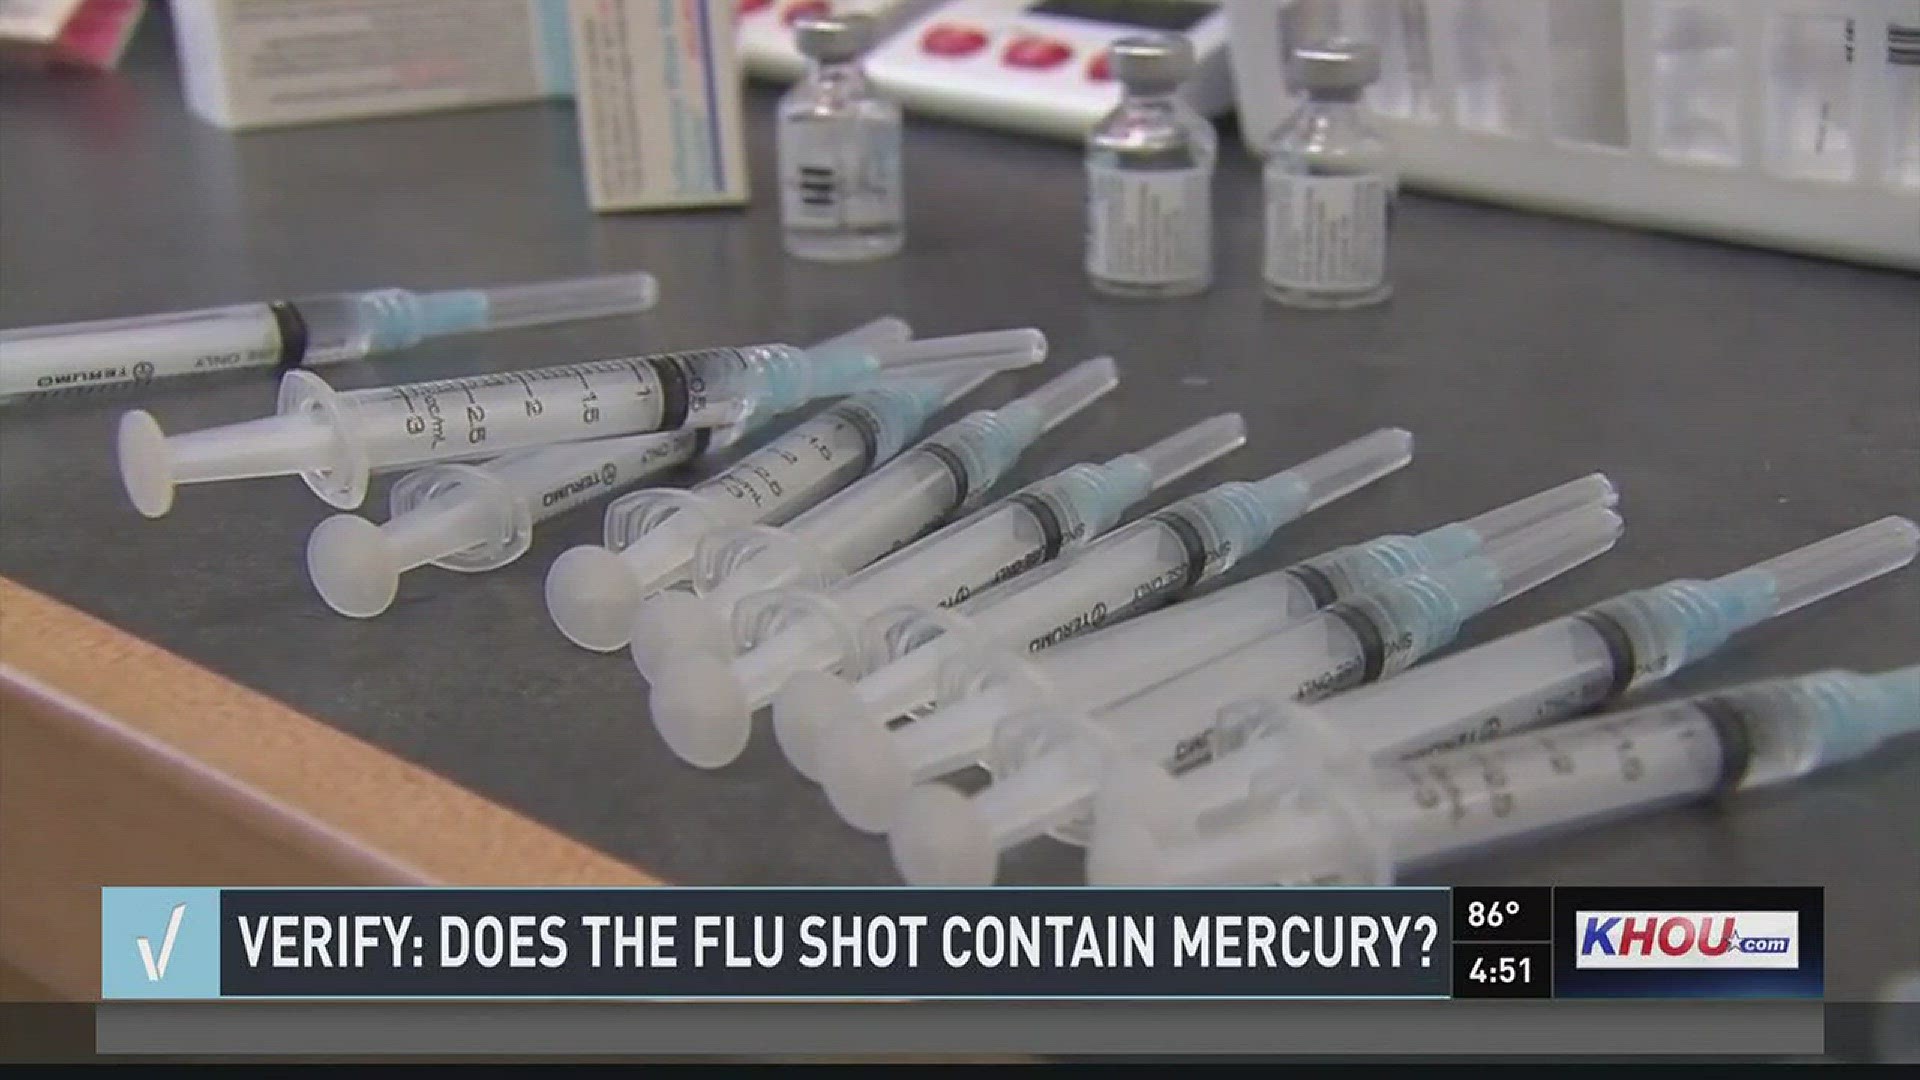 There's been recent talk on social media about mercury being in flu vaccines. Some people mercury in flu shots could be linked to autism.